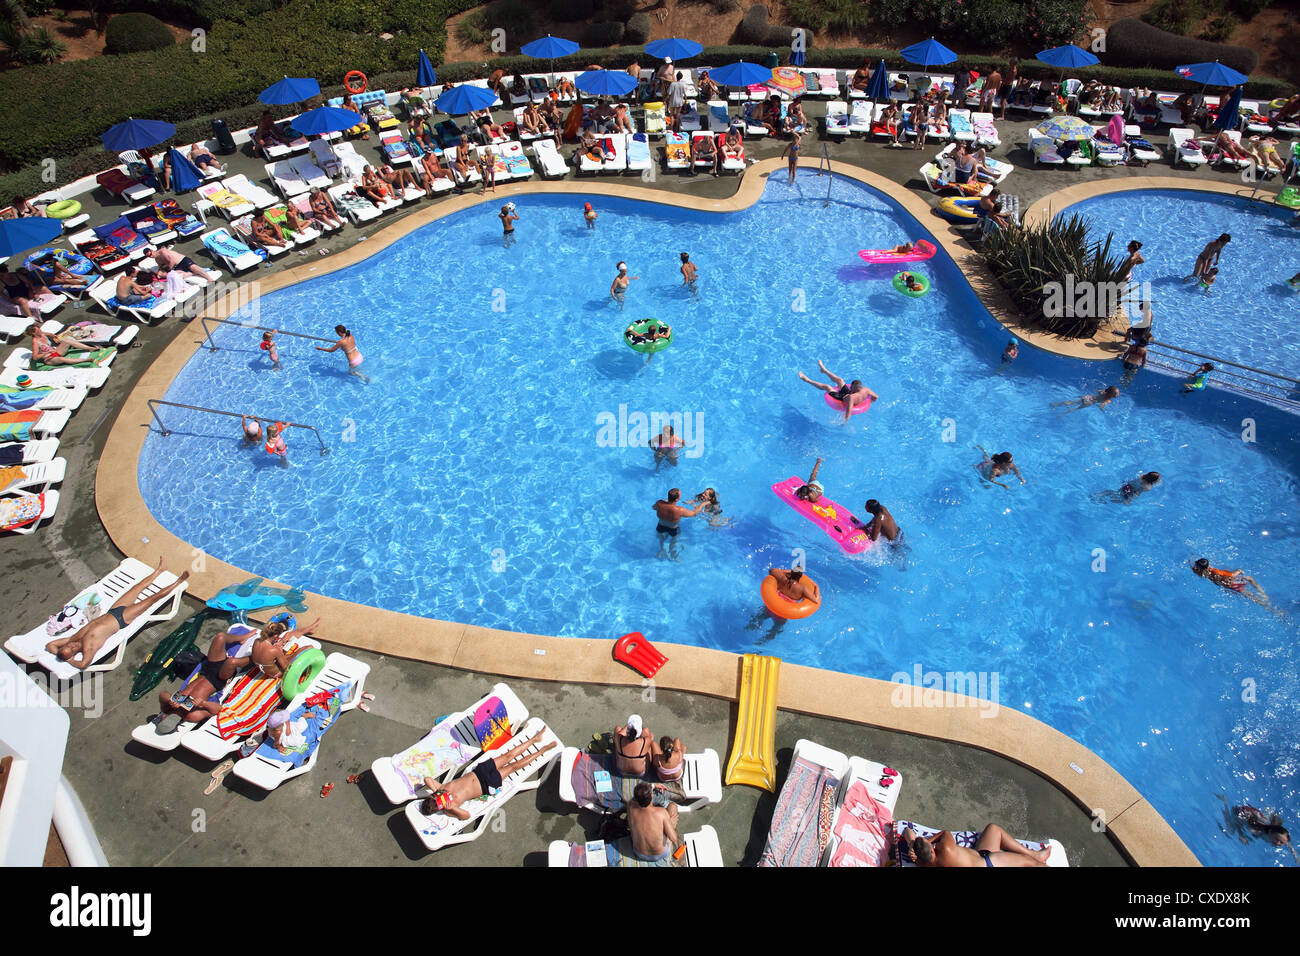 Cala Esmeralda, people at the swimming pool of a hotel Stock Photo